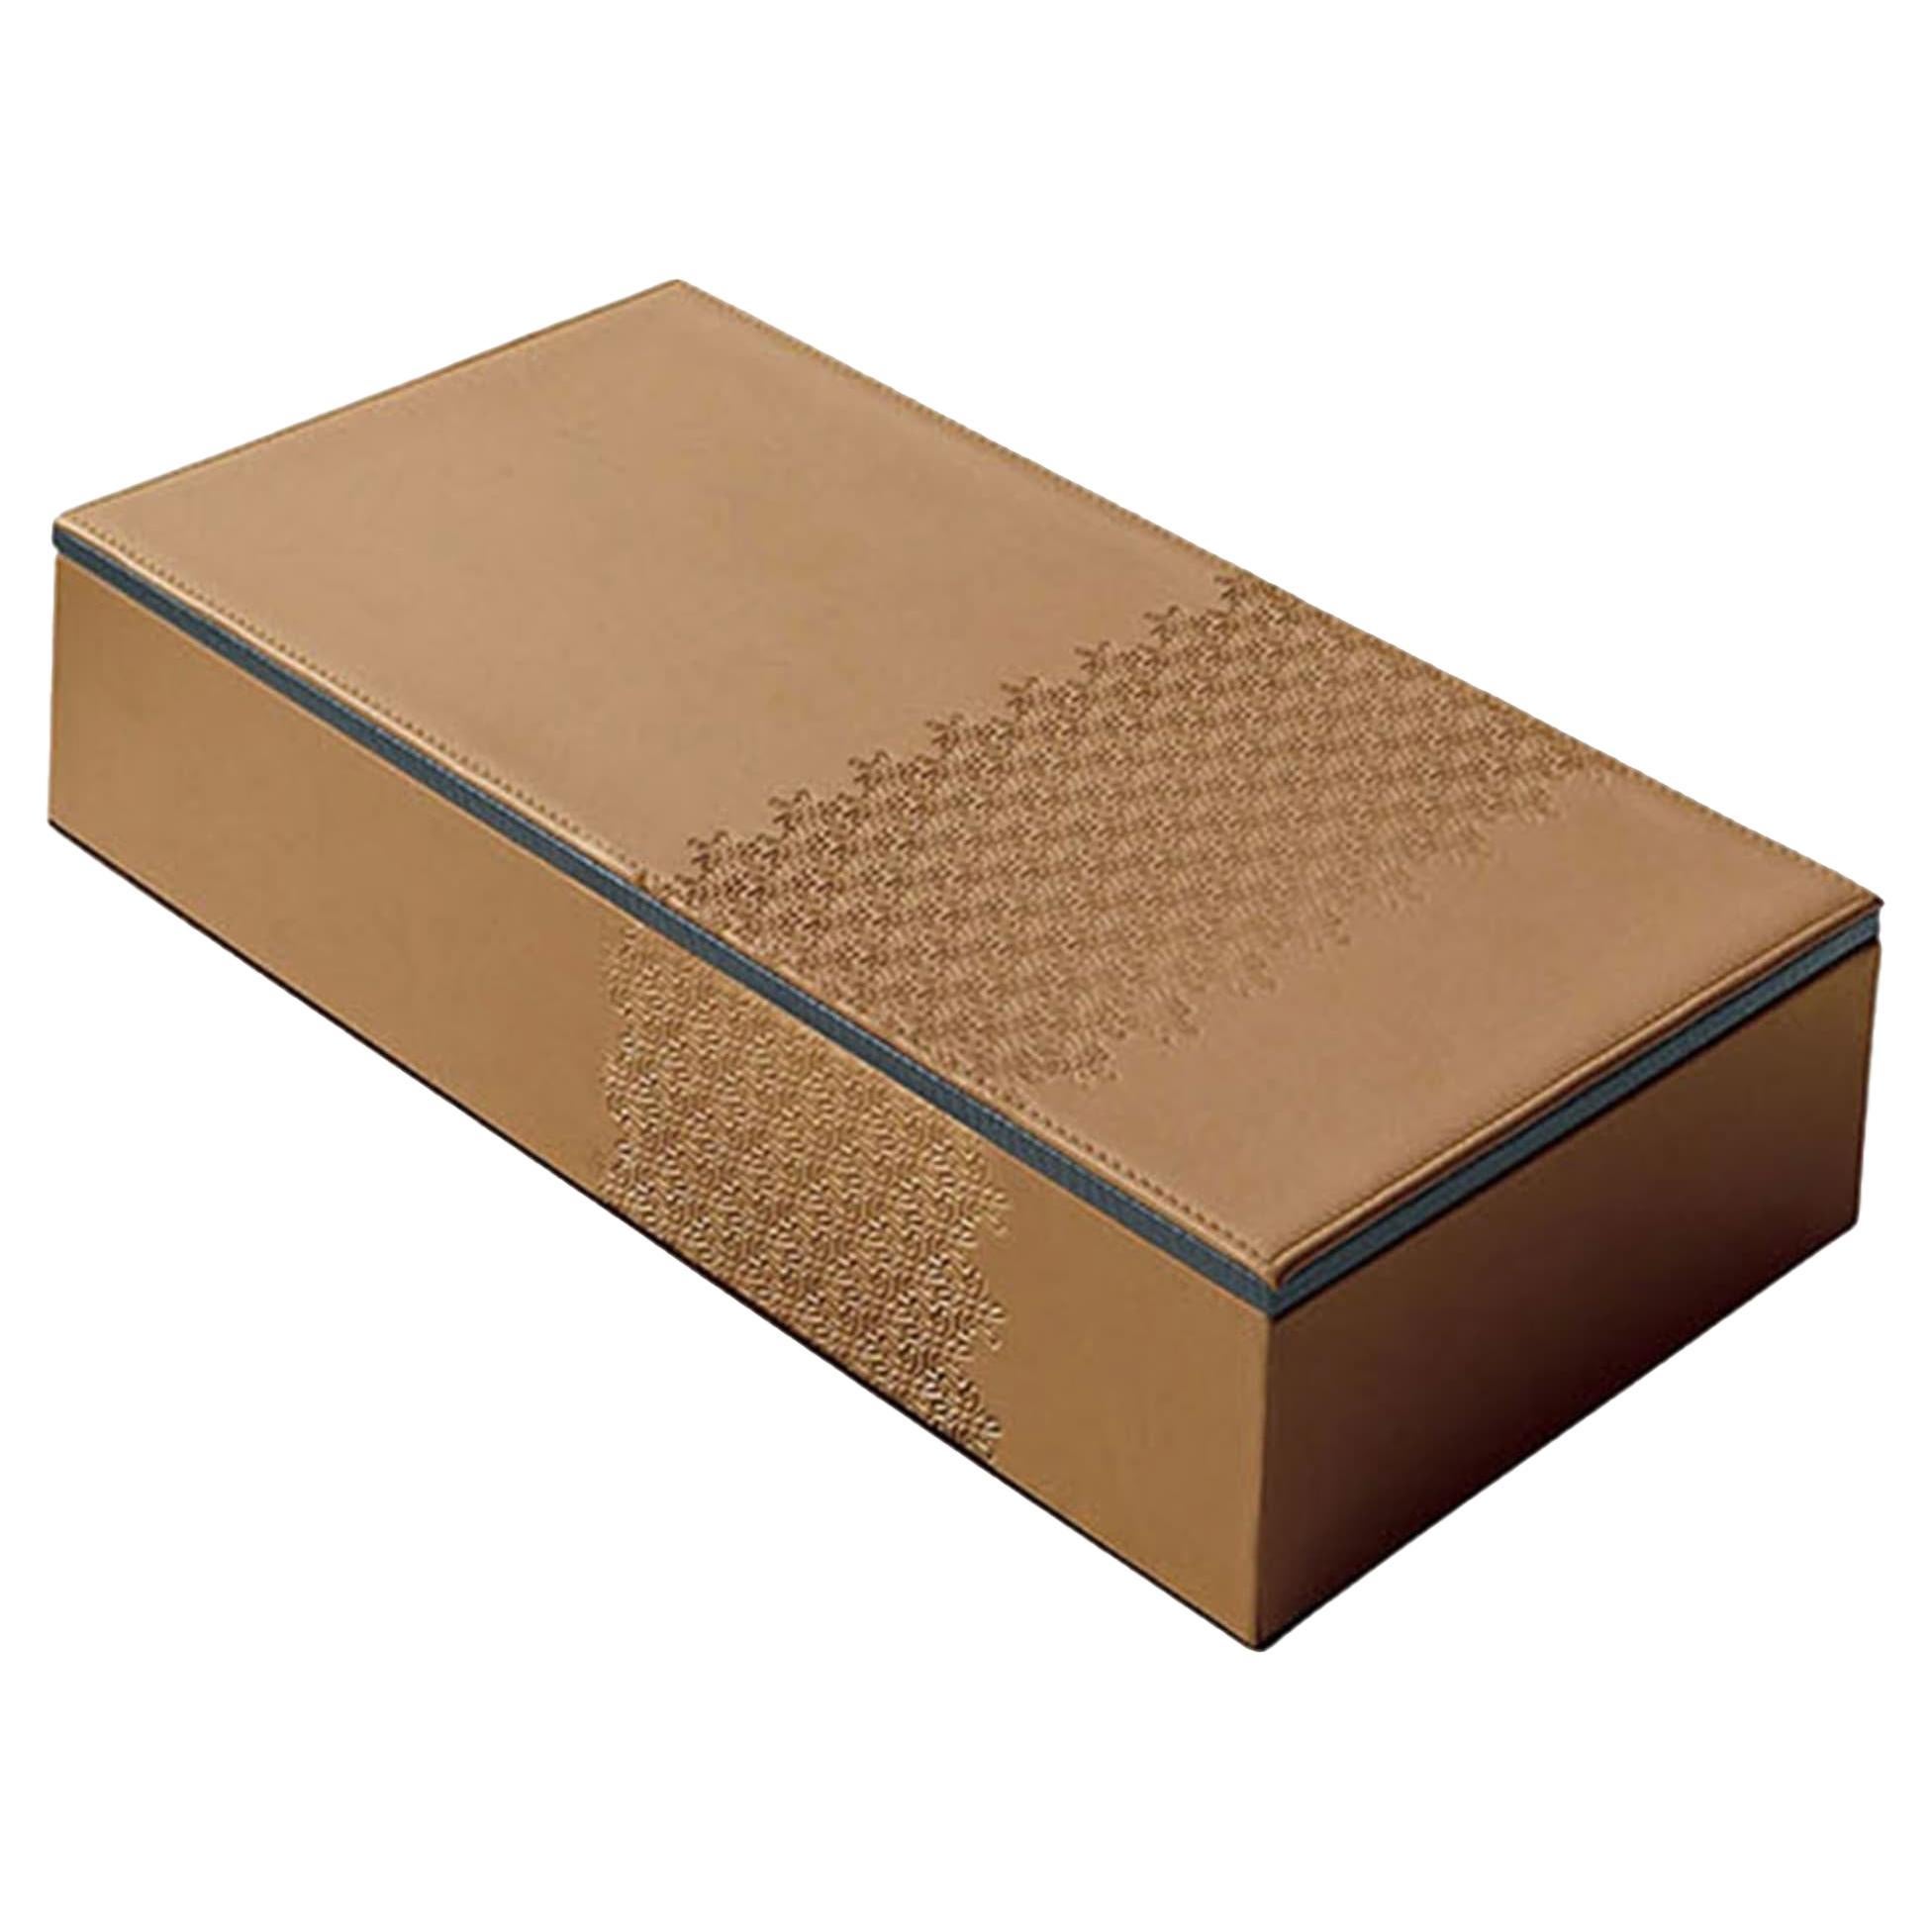 Light-Brown Leather-Covered Box